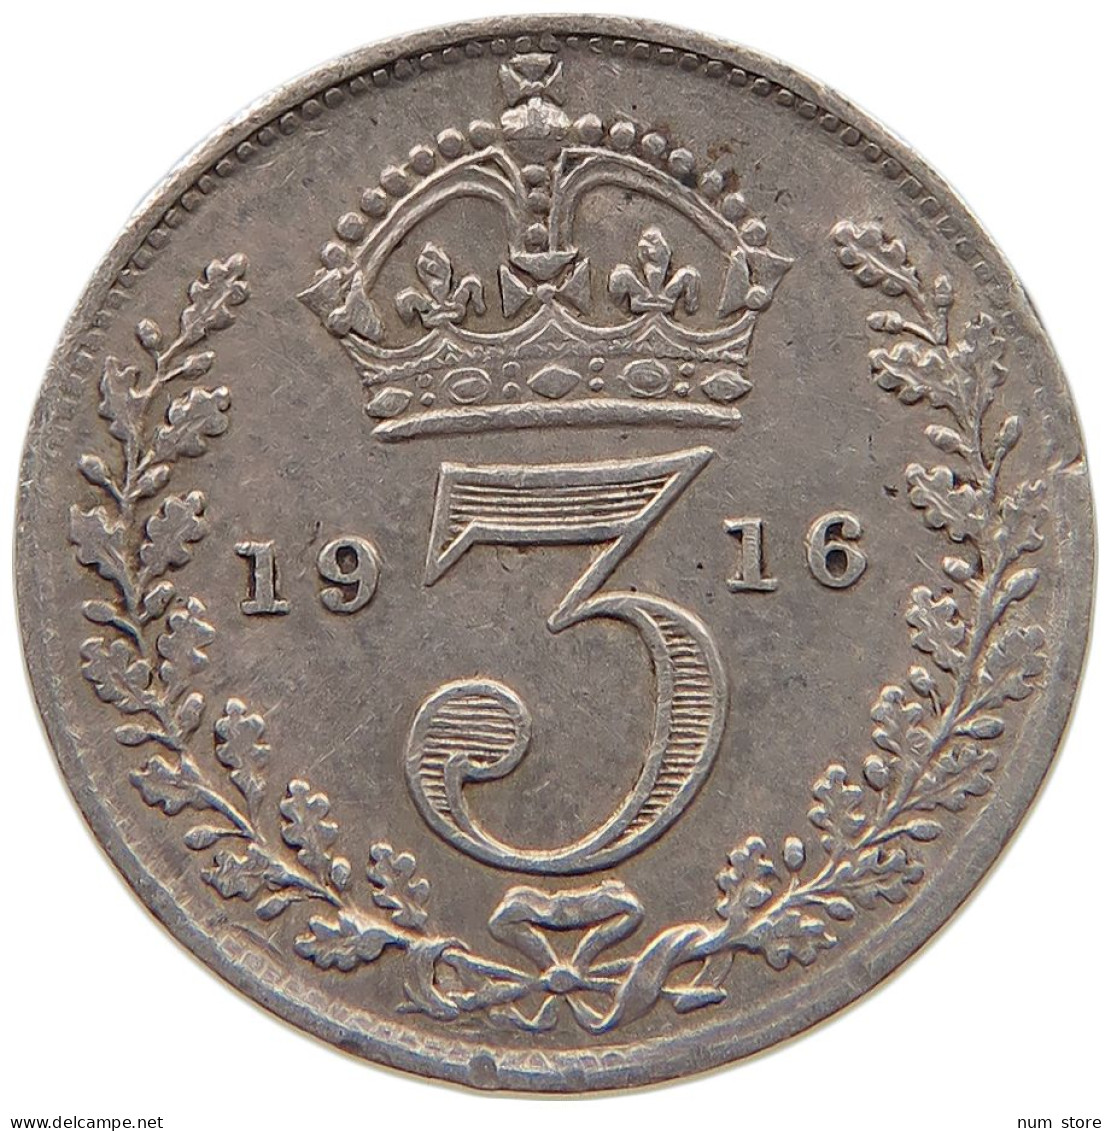 GREAT BRITAIN THREEPENCE 1916 George V. (1910-1936) ENGRAVED #c045 0273 - F. 3 Pence